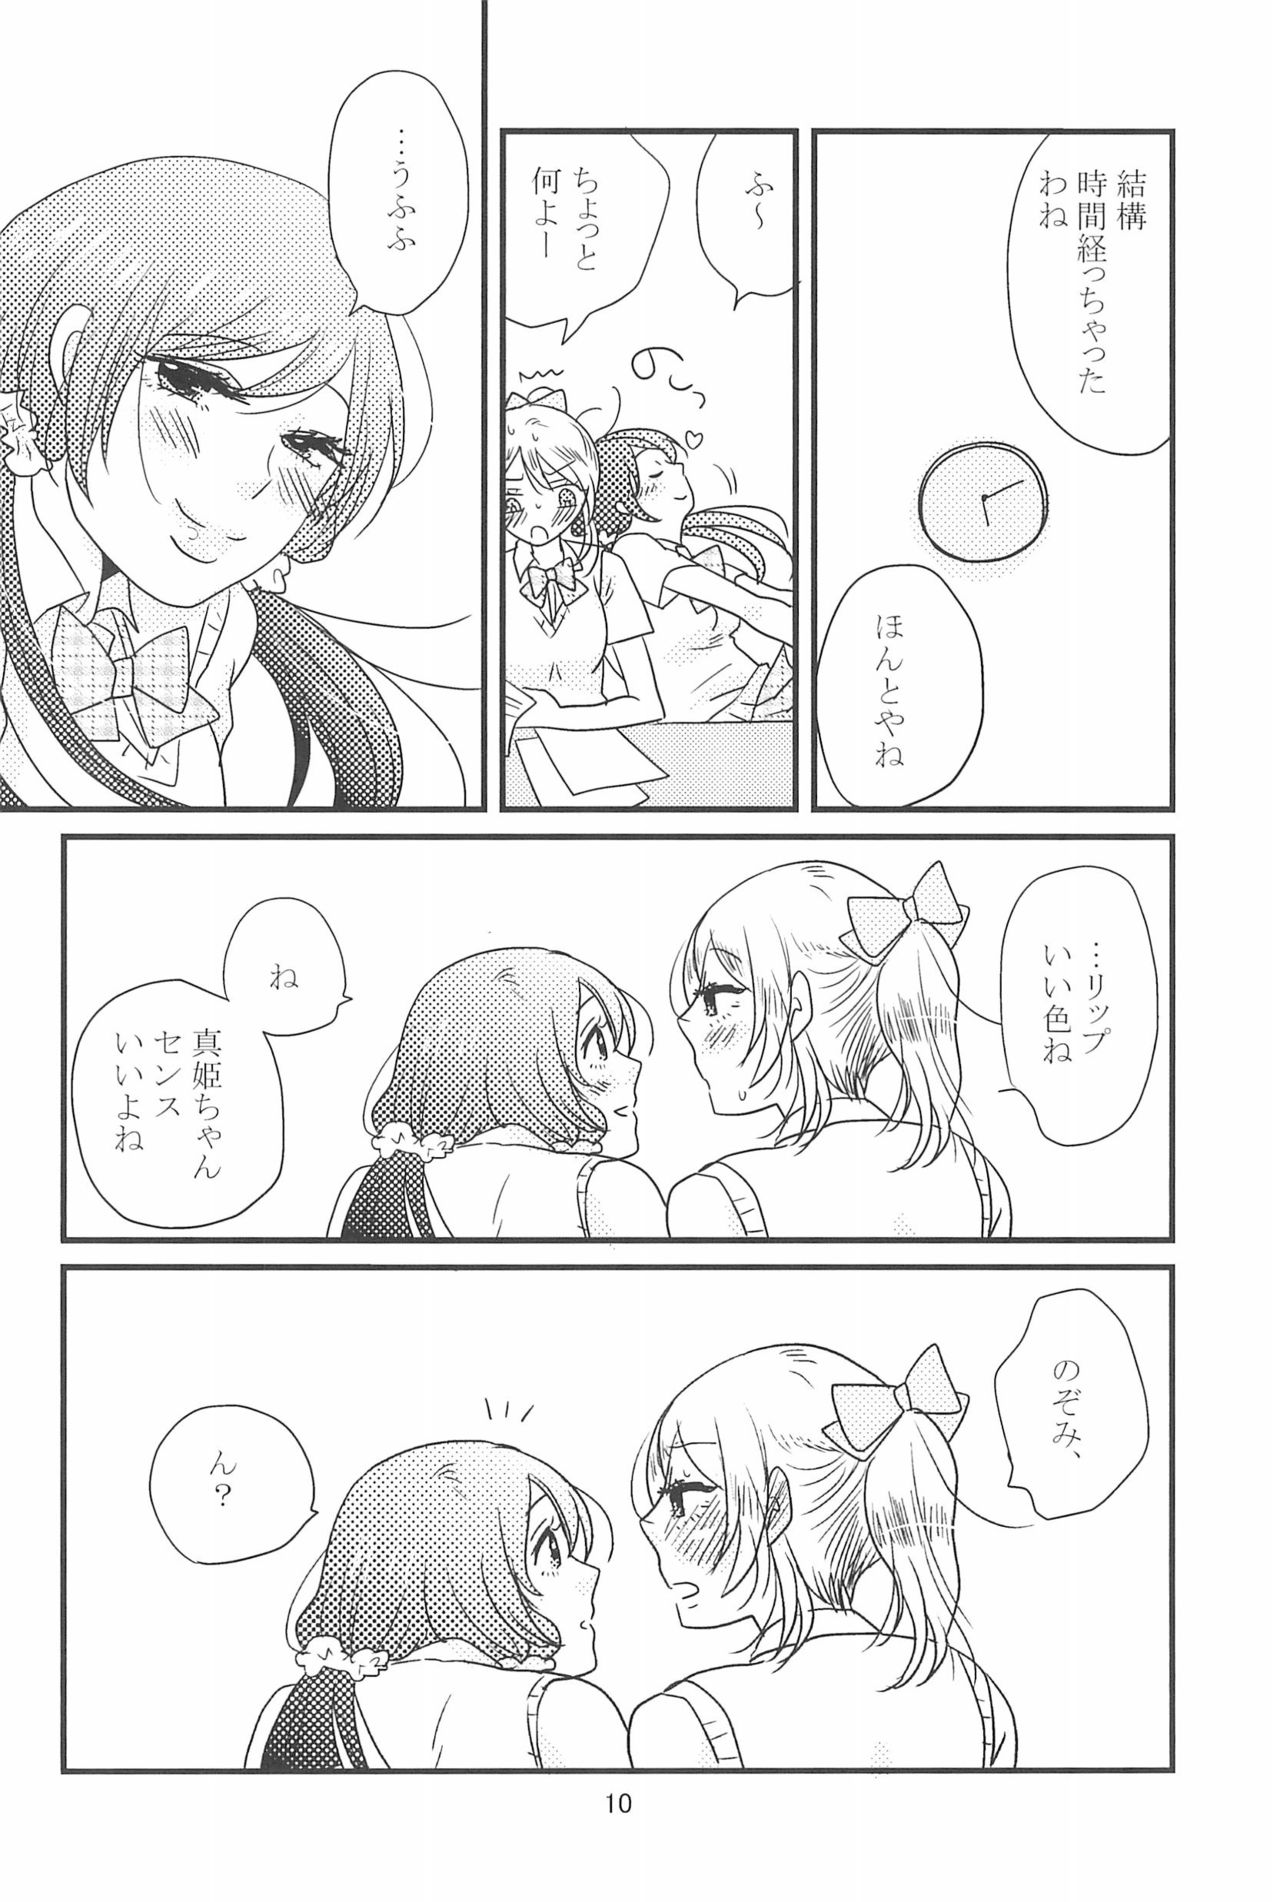 (C90) [BK*N2 (Mikawa Miso)] HAPPY GO LUCKY DAYS (Love Live!) page 14 full